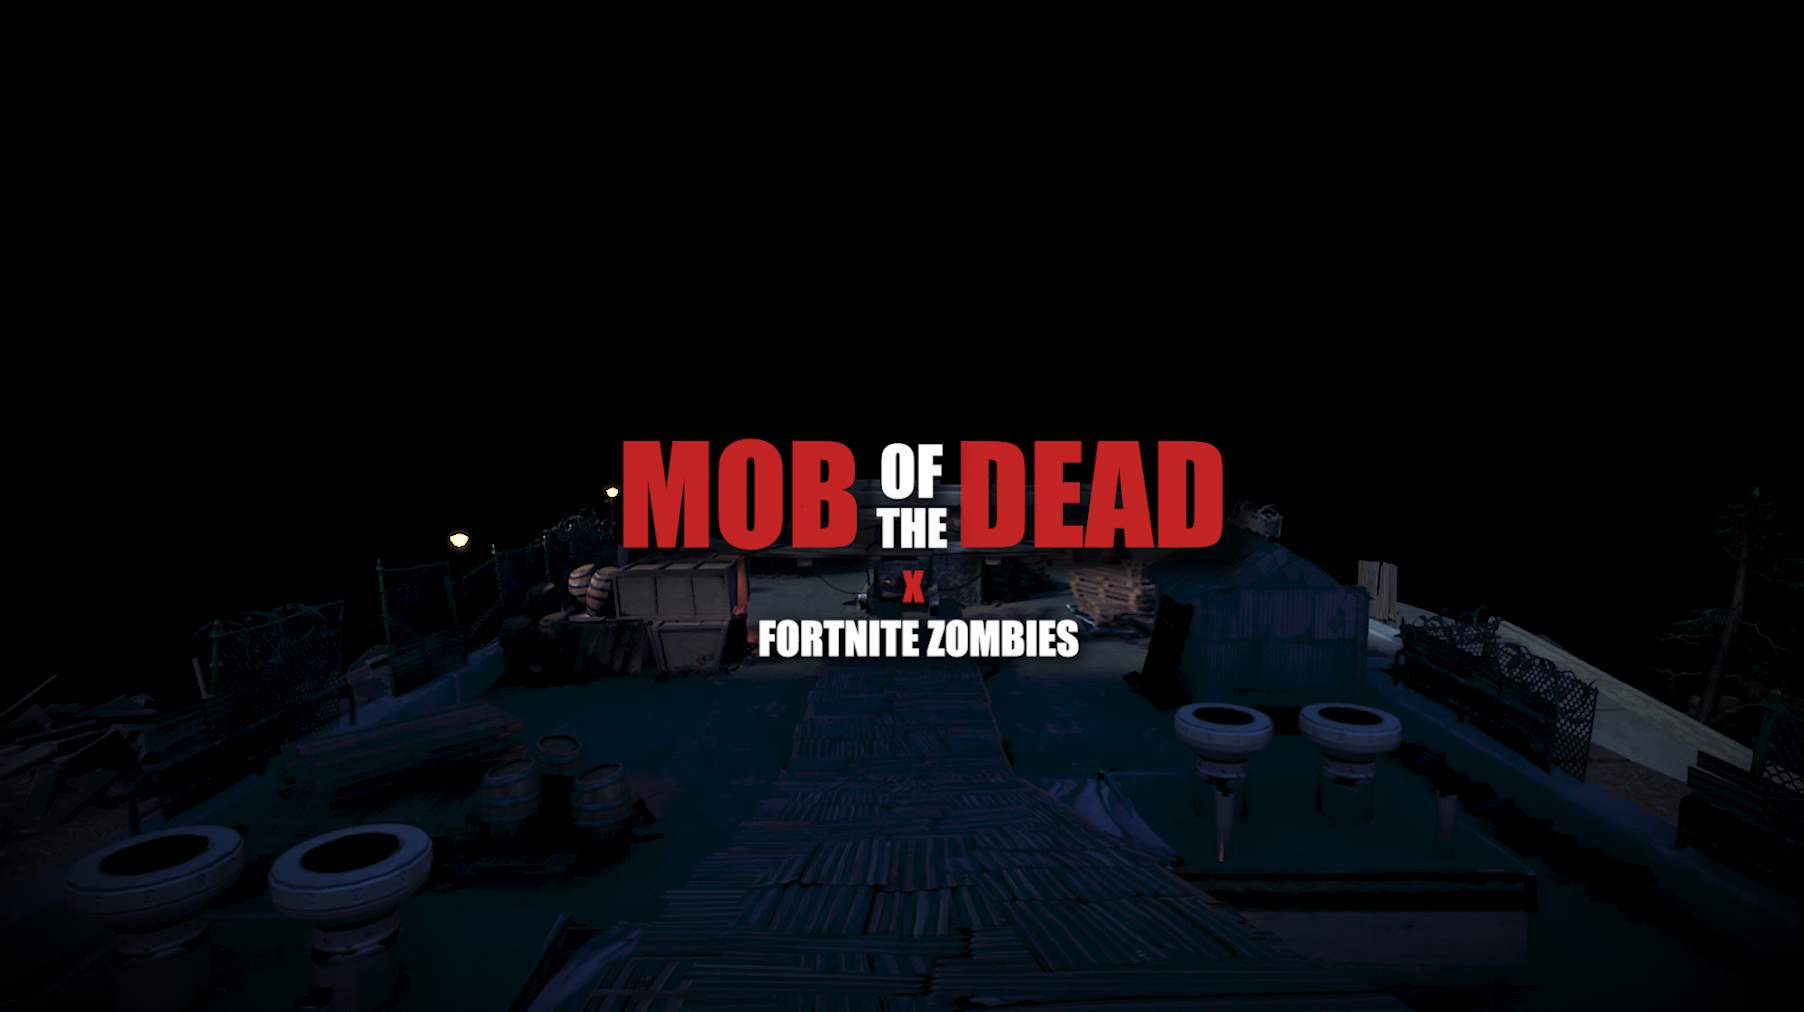 black ops 2 mob of the dead